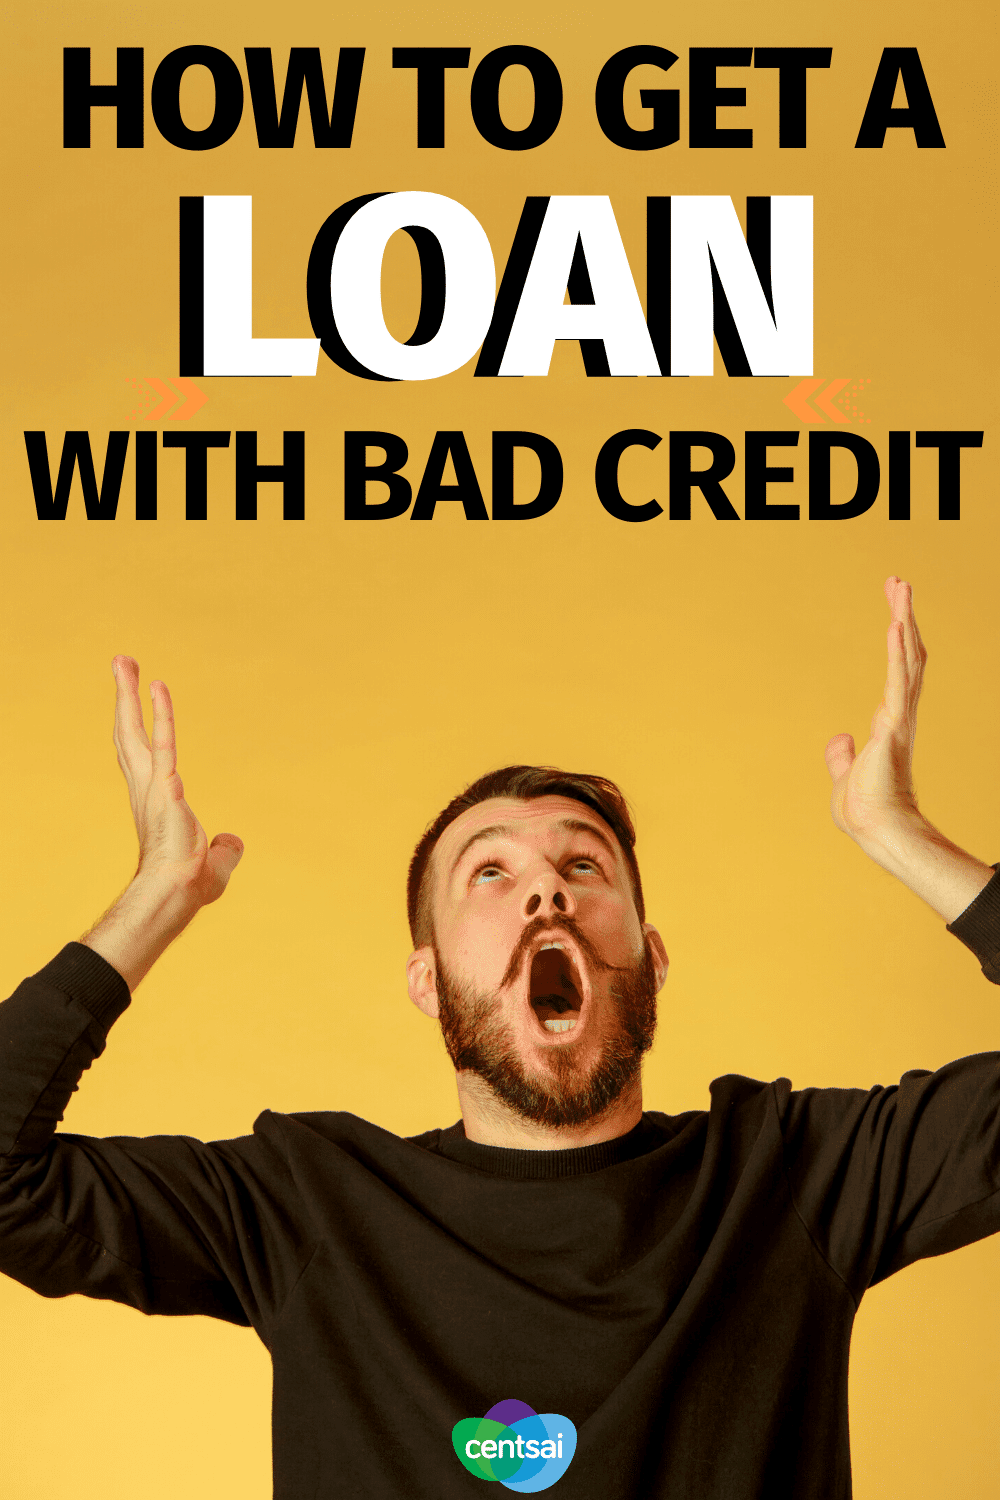 How to Get a Loan With Bad Credit